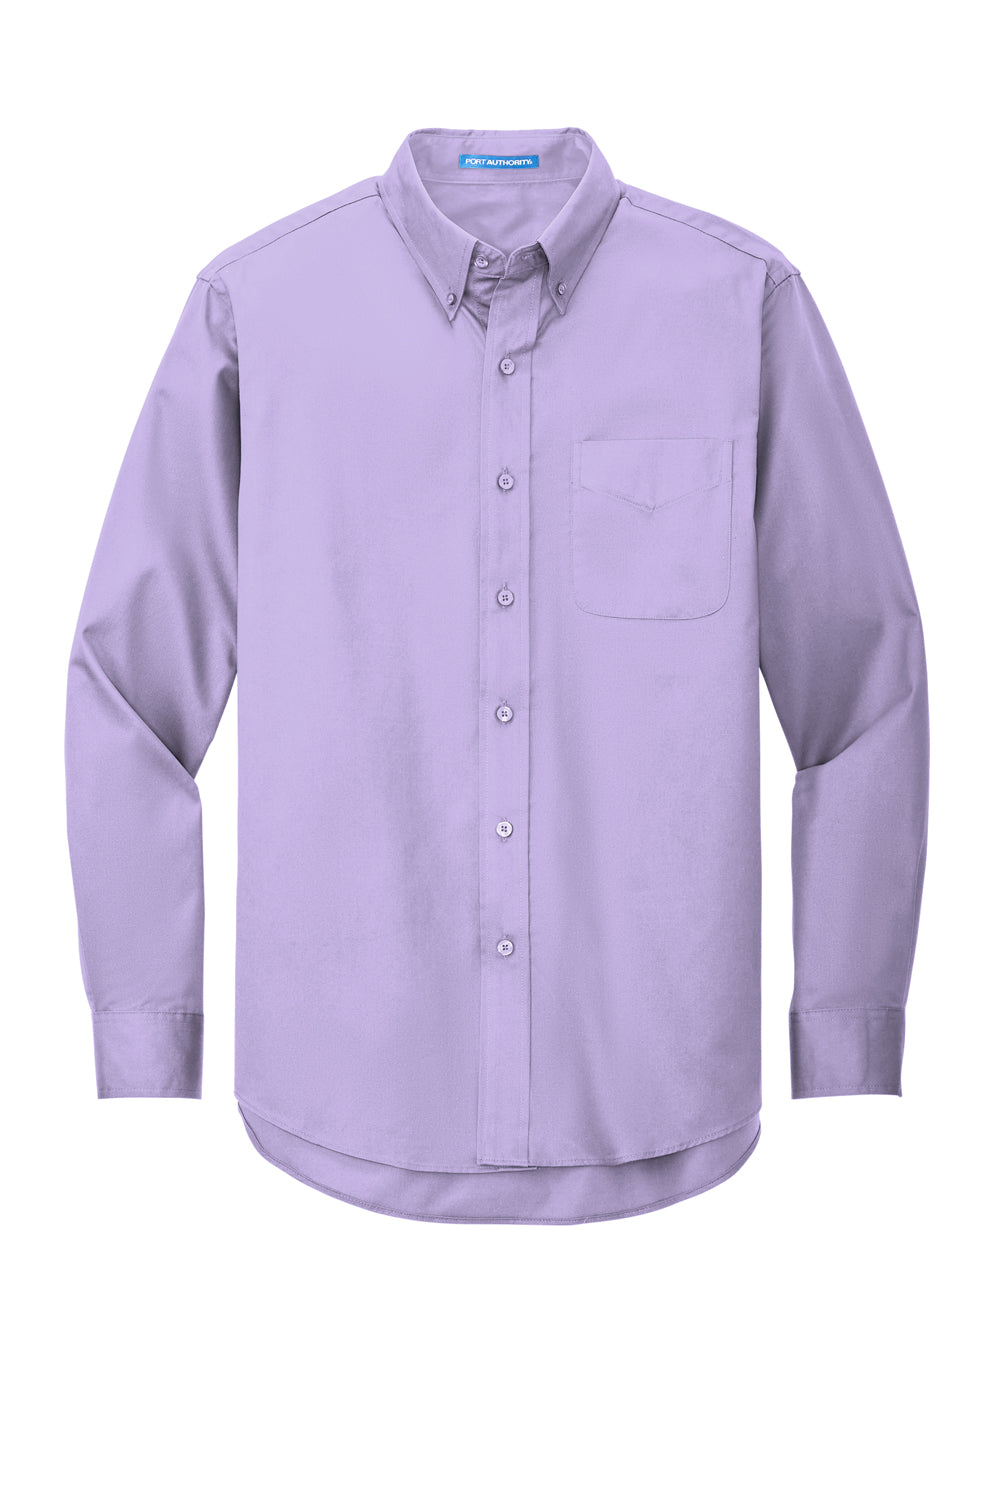 Port Authority S608/TLS608/S608ES Mens Easy Care Wrinkle Resistant Long Sleeve Button Down Shirt w/ Pocket Bright Lavender Purple Flat Front